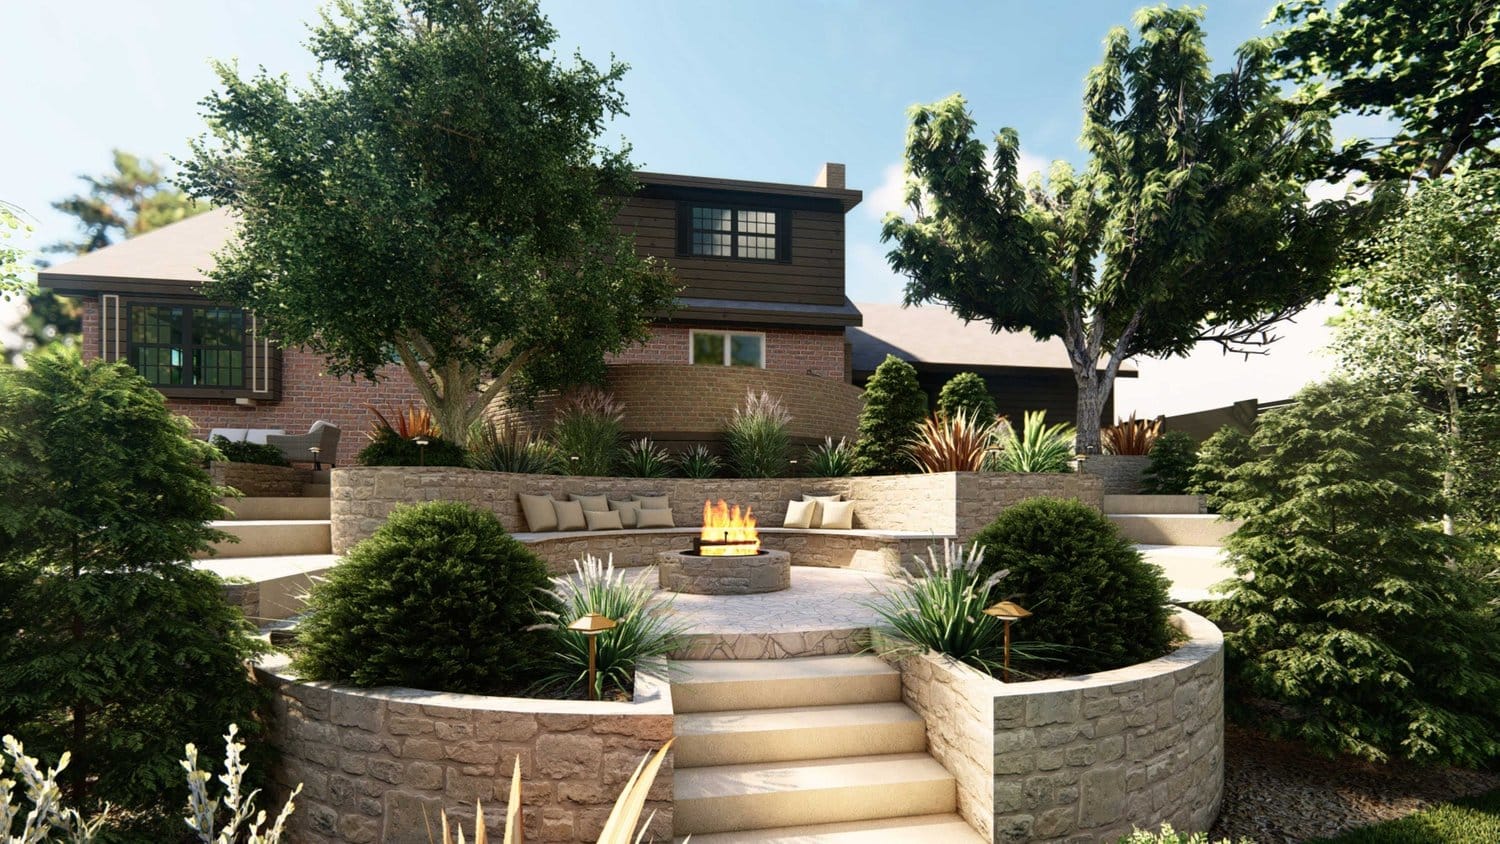 Milwaukee backyard fire pit seating area with steps, trees, shrubs, flowers, retaining wall